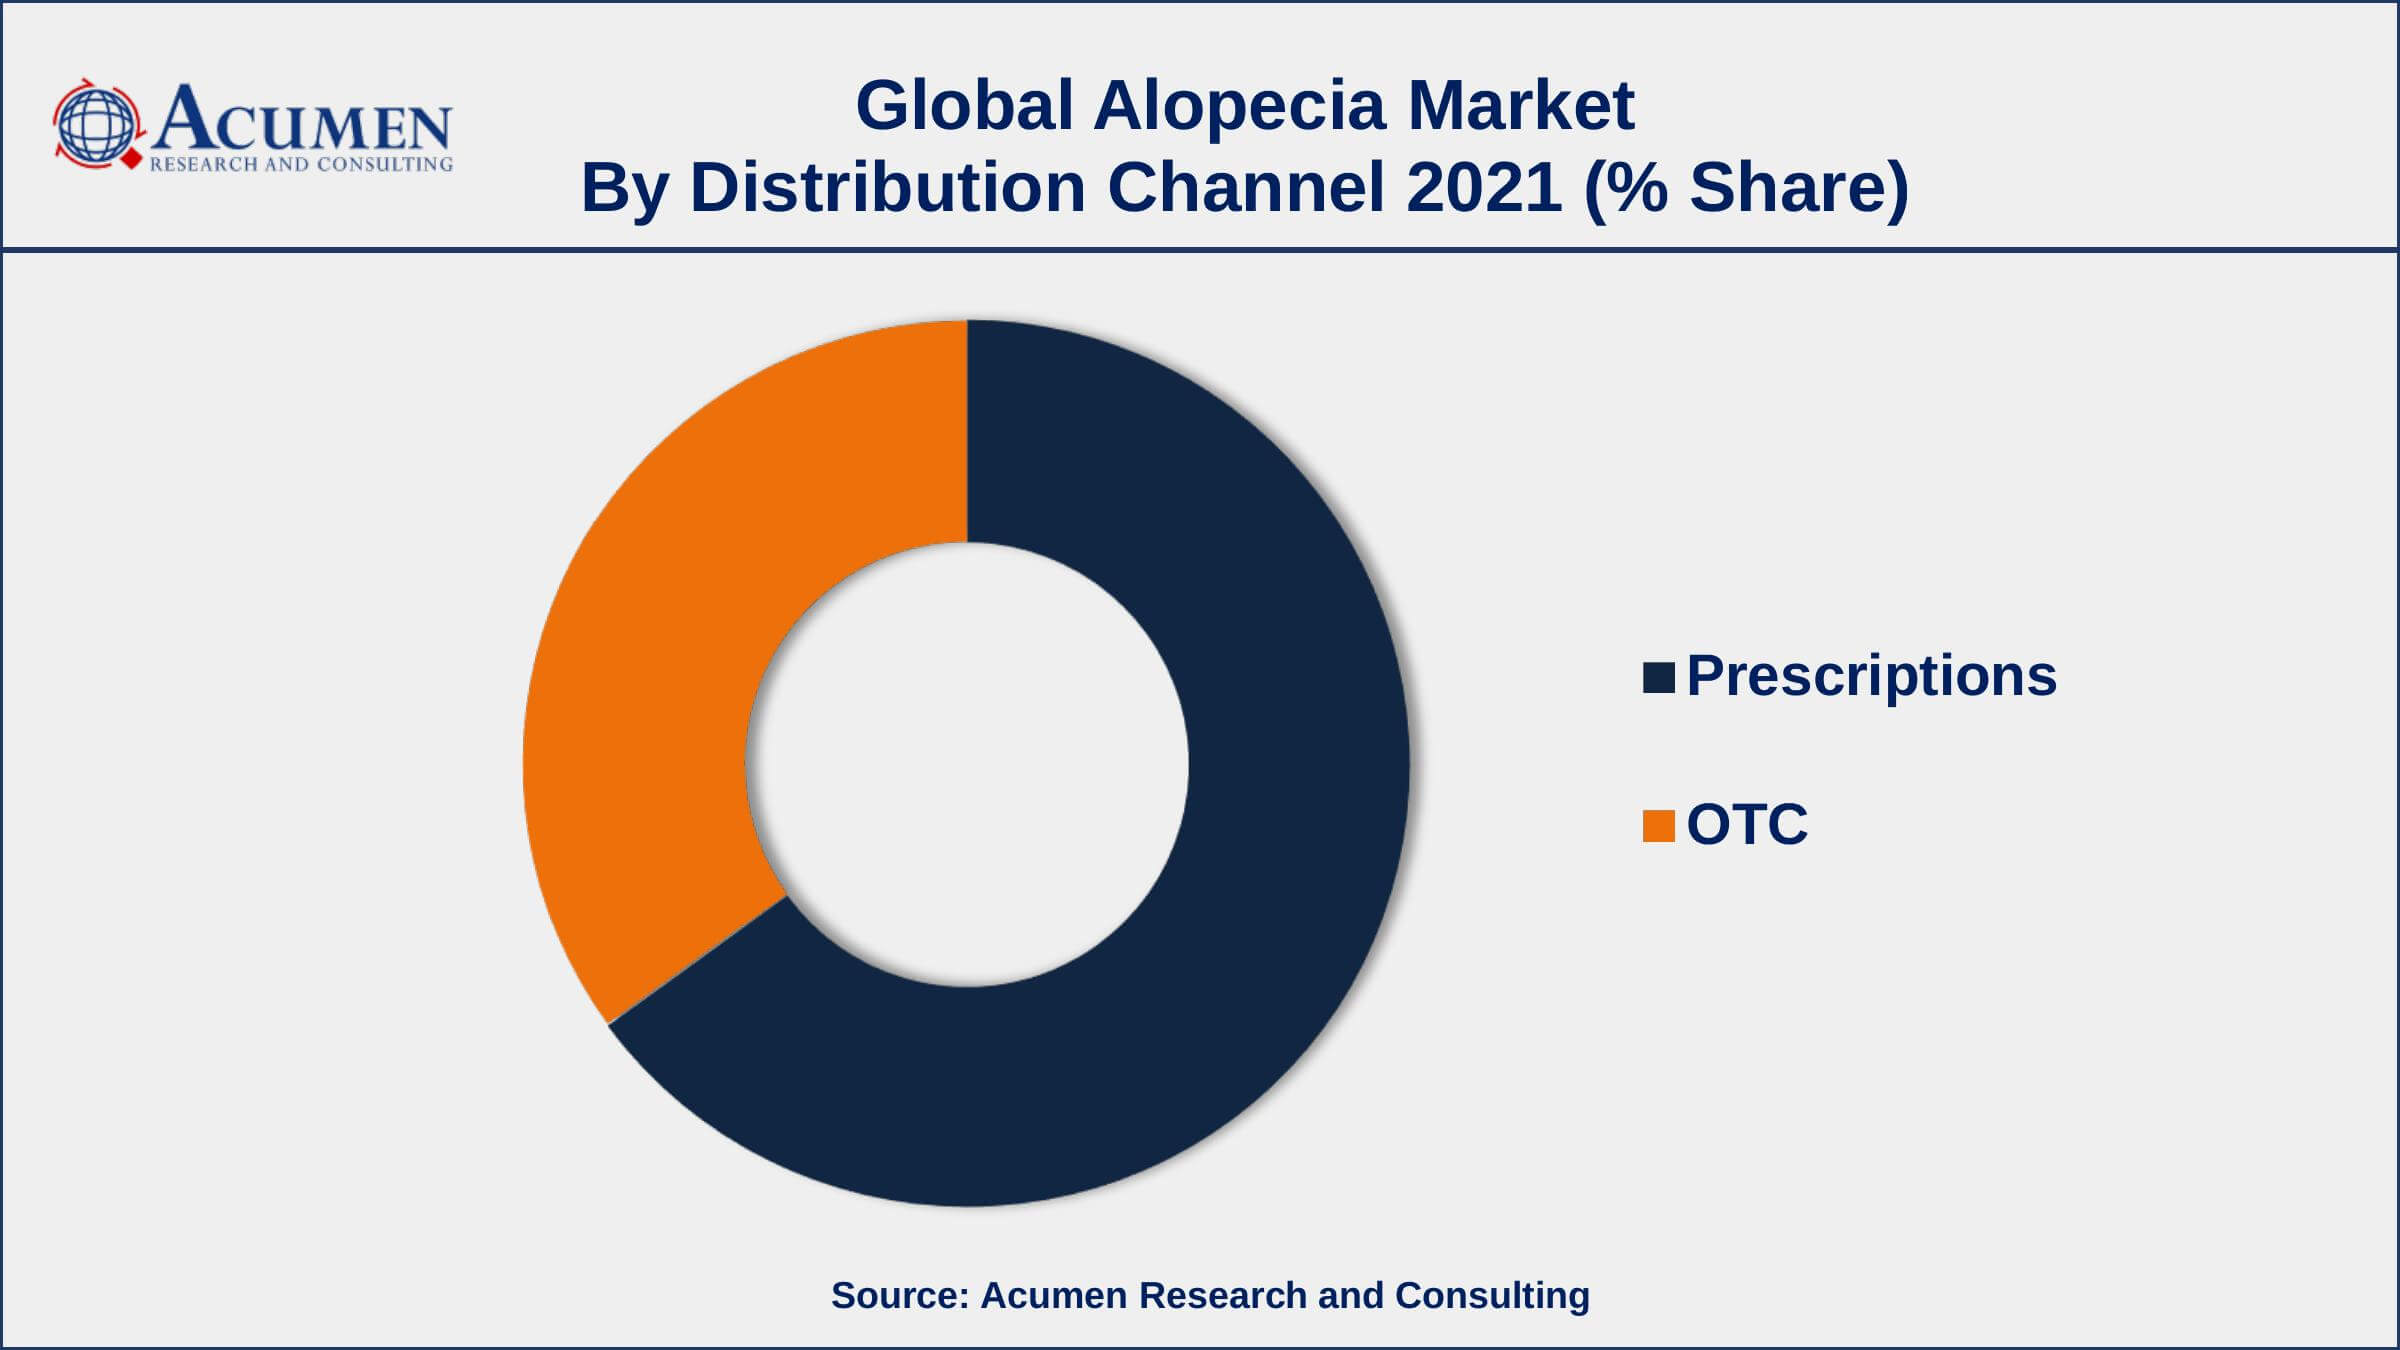 By distribution channel, prescription segment engaged more than 66% of the total market share in 2021